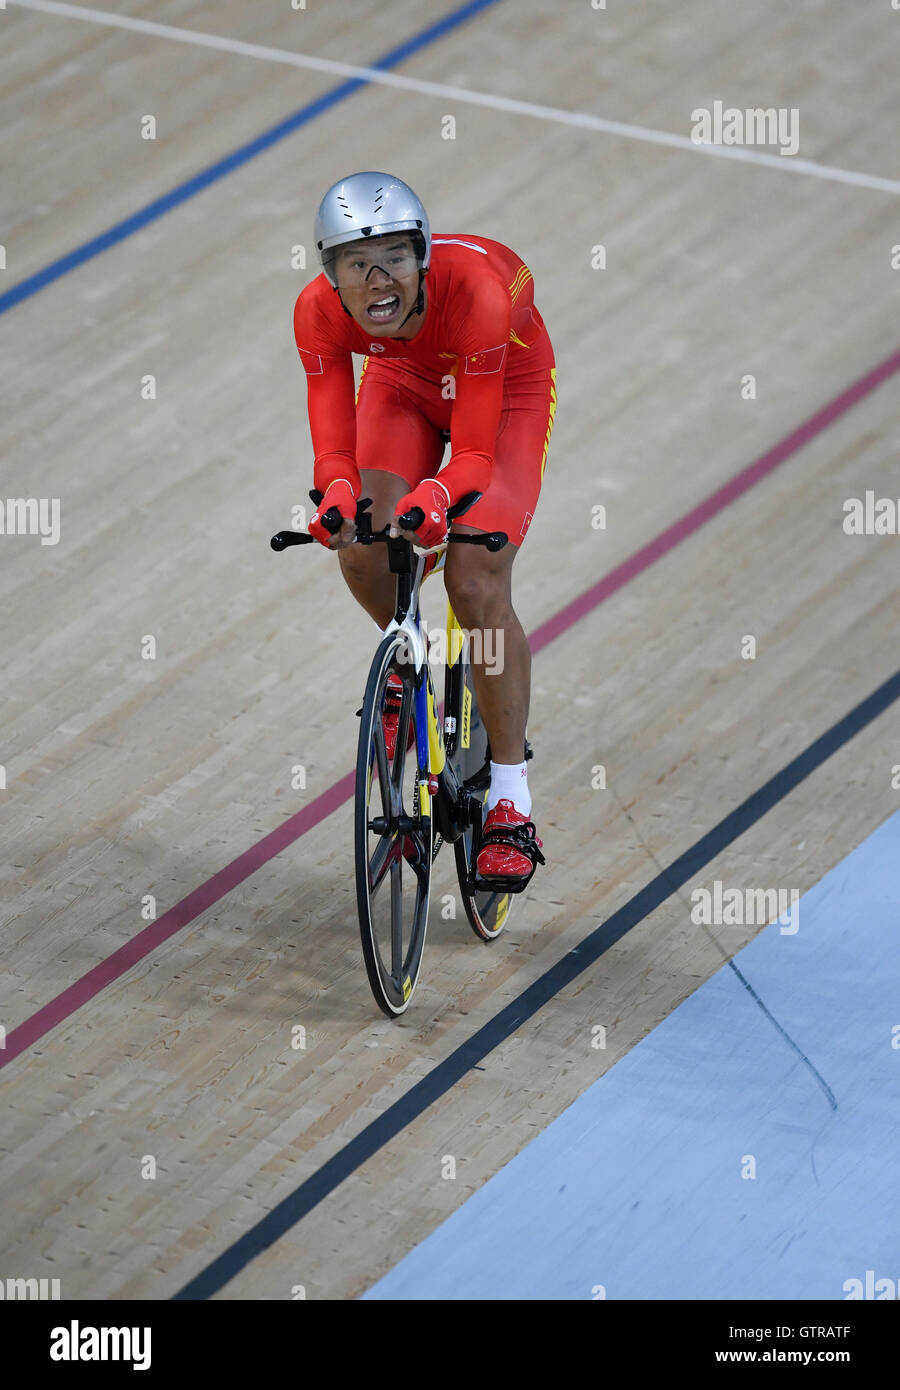 Rio de Janeiro, Brazil 09SEP16:China's Zangyu Li competes in the men's C1 3000 meters individual pursuit on day two of competition at the Rio 2016 Paralympic Games. Stock Photo